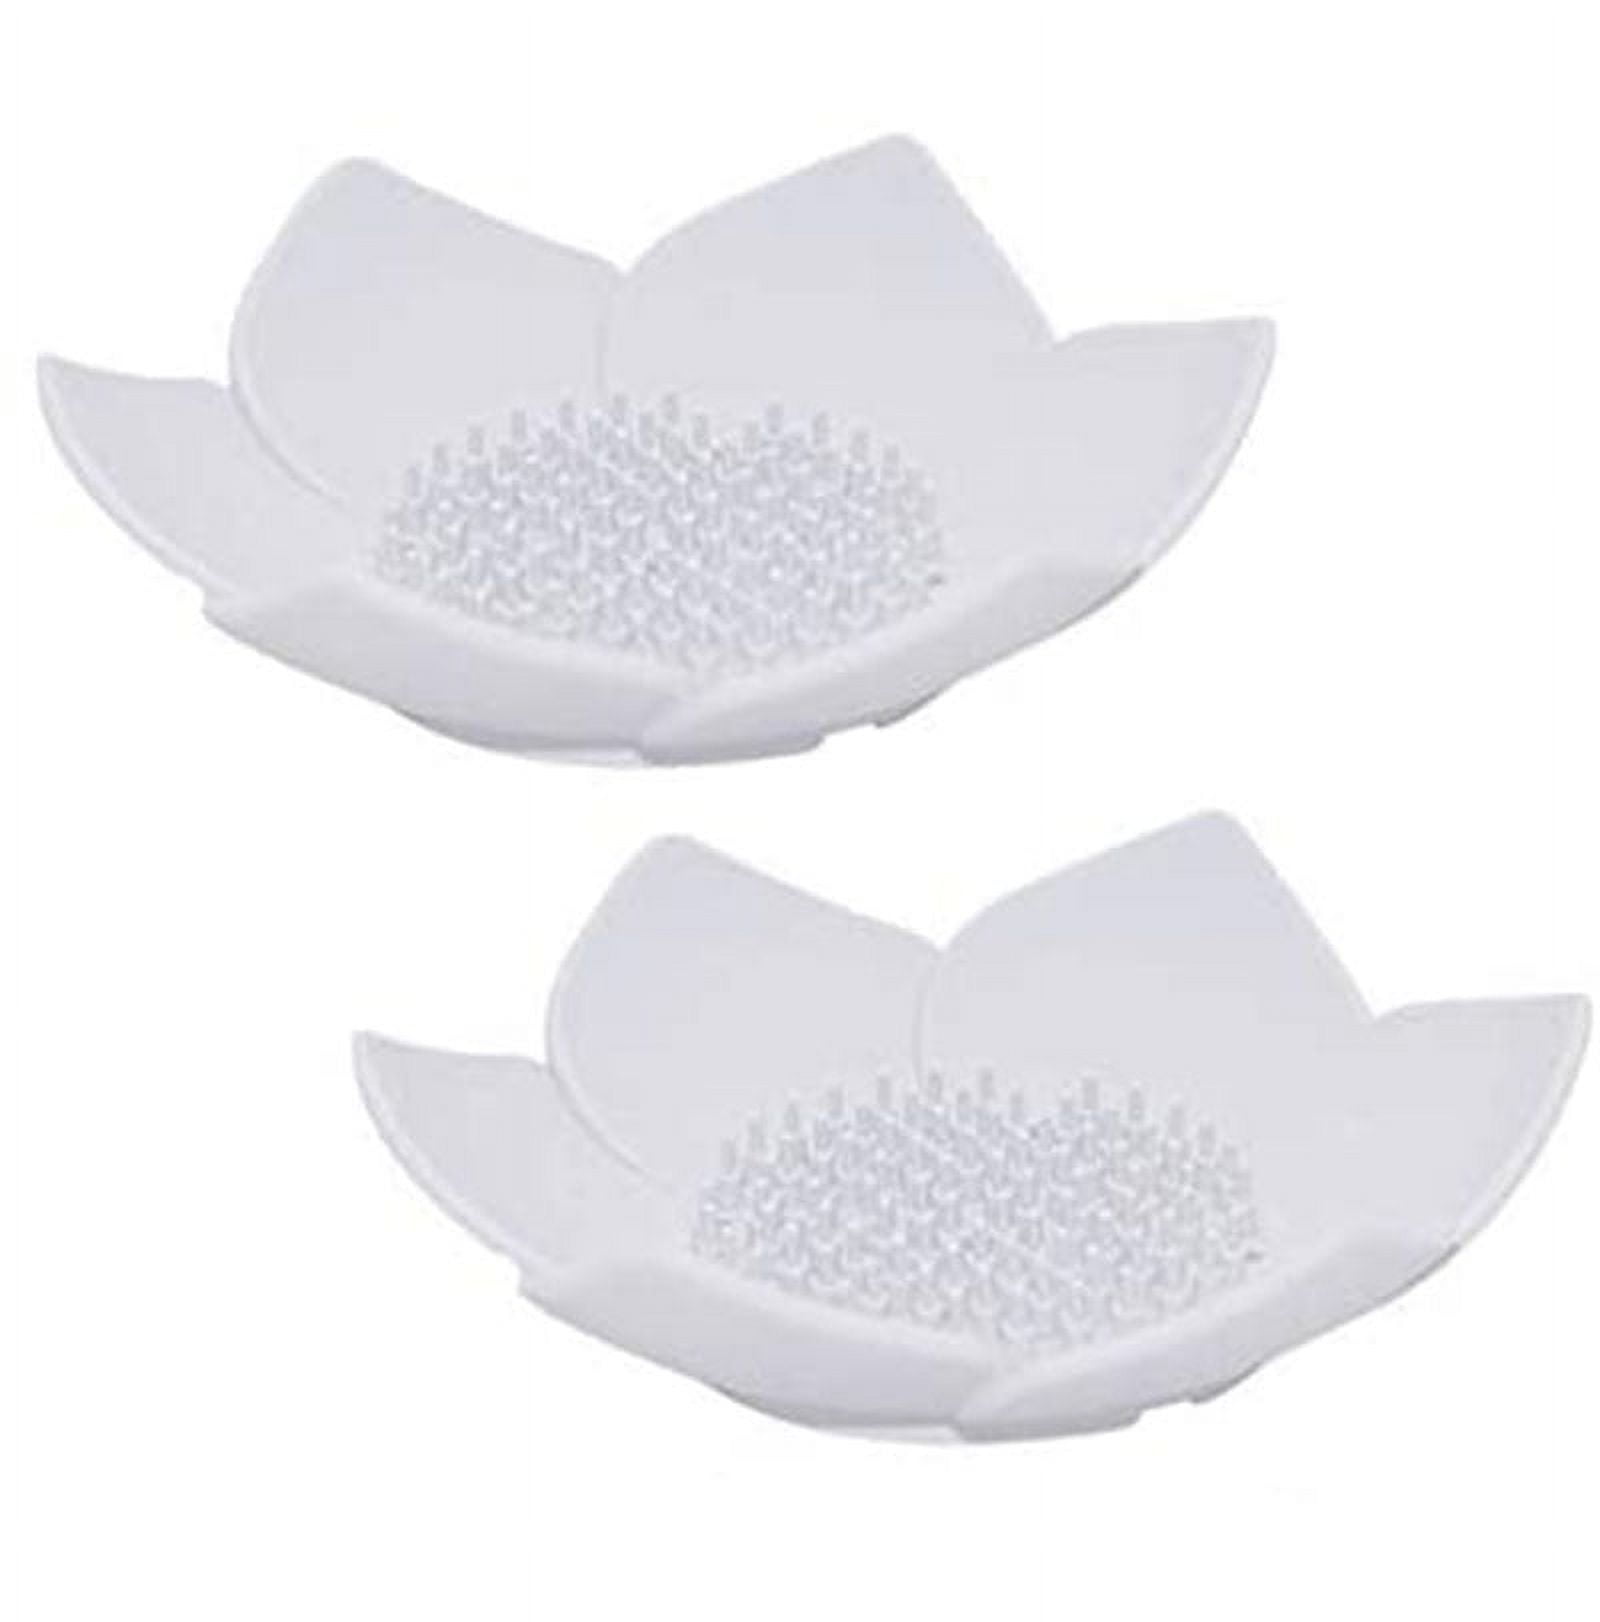 Shower Steamer Tray Lotus Flowers Soap Dish Silicone Soap Dish Small Self  Draining Bar Soap Holder - AliExpress